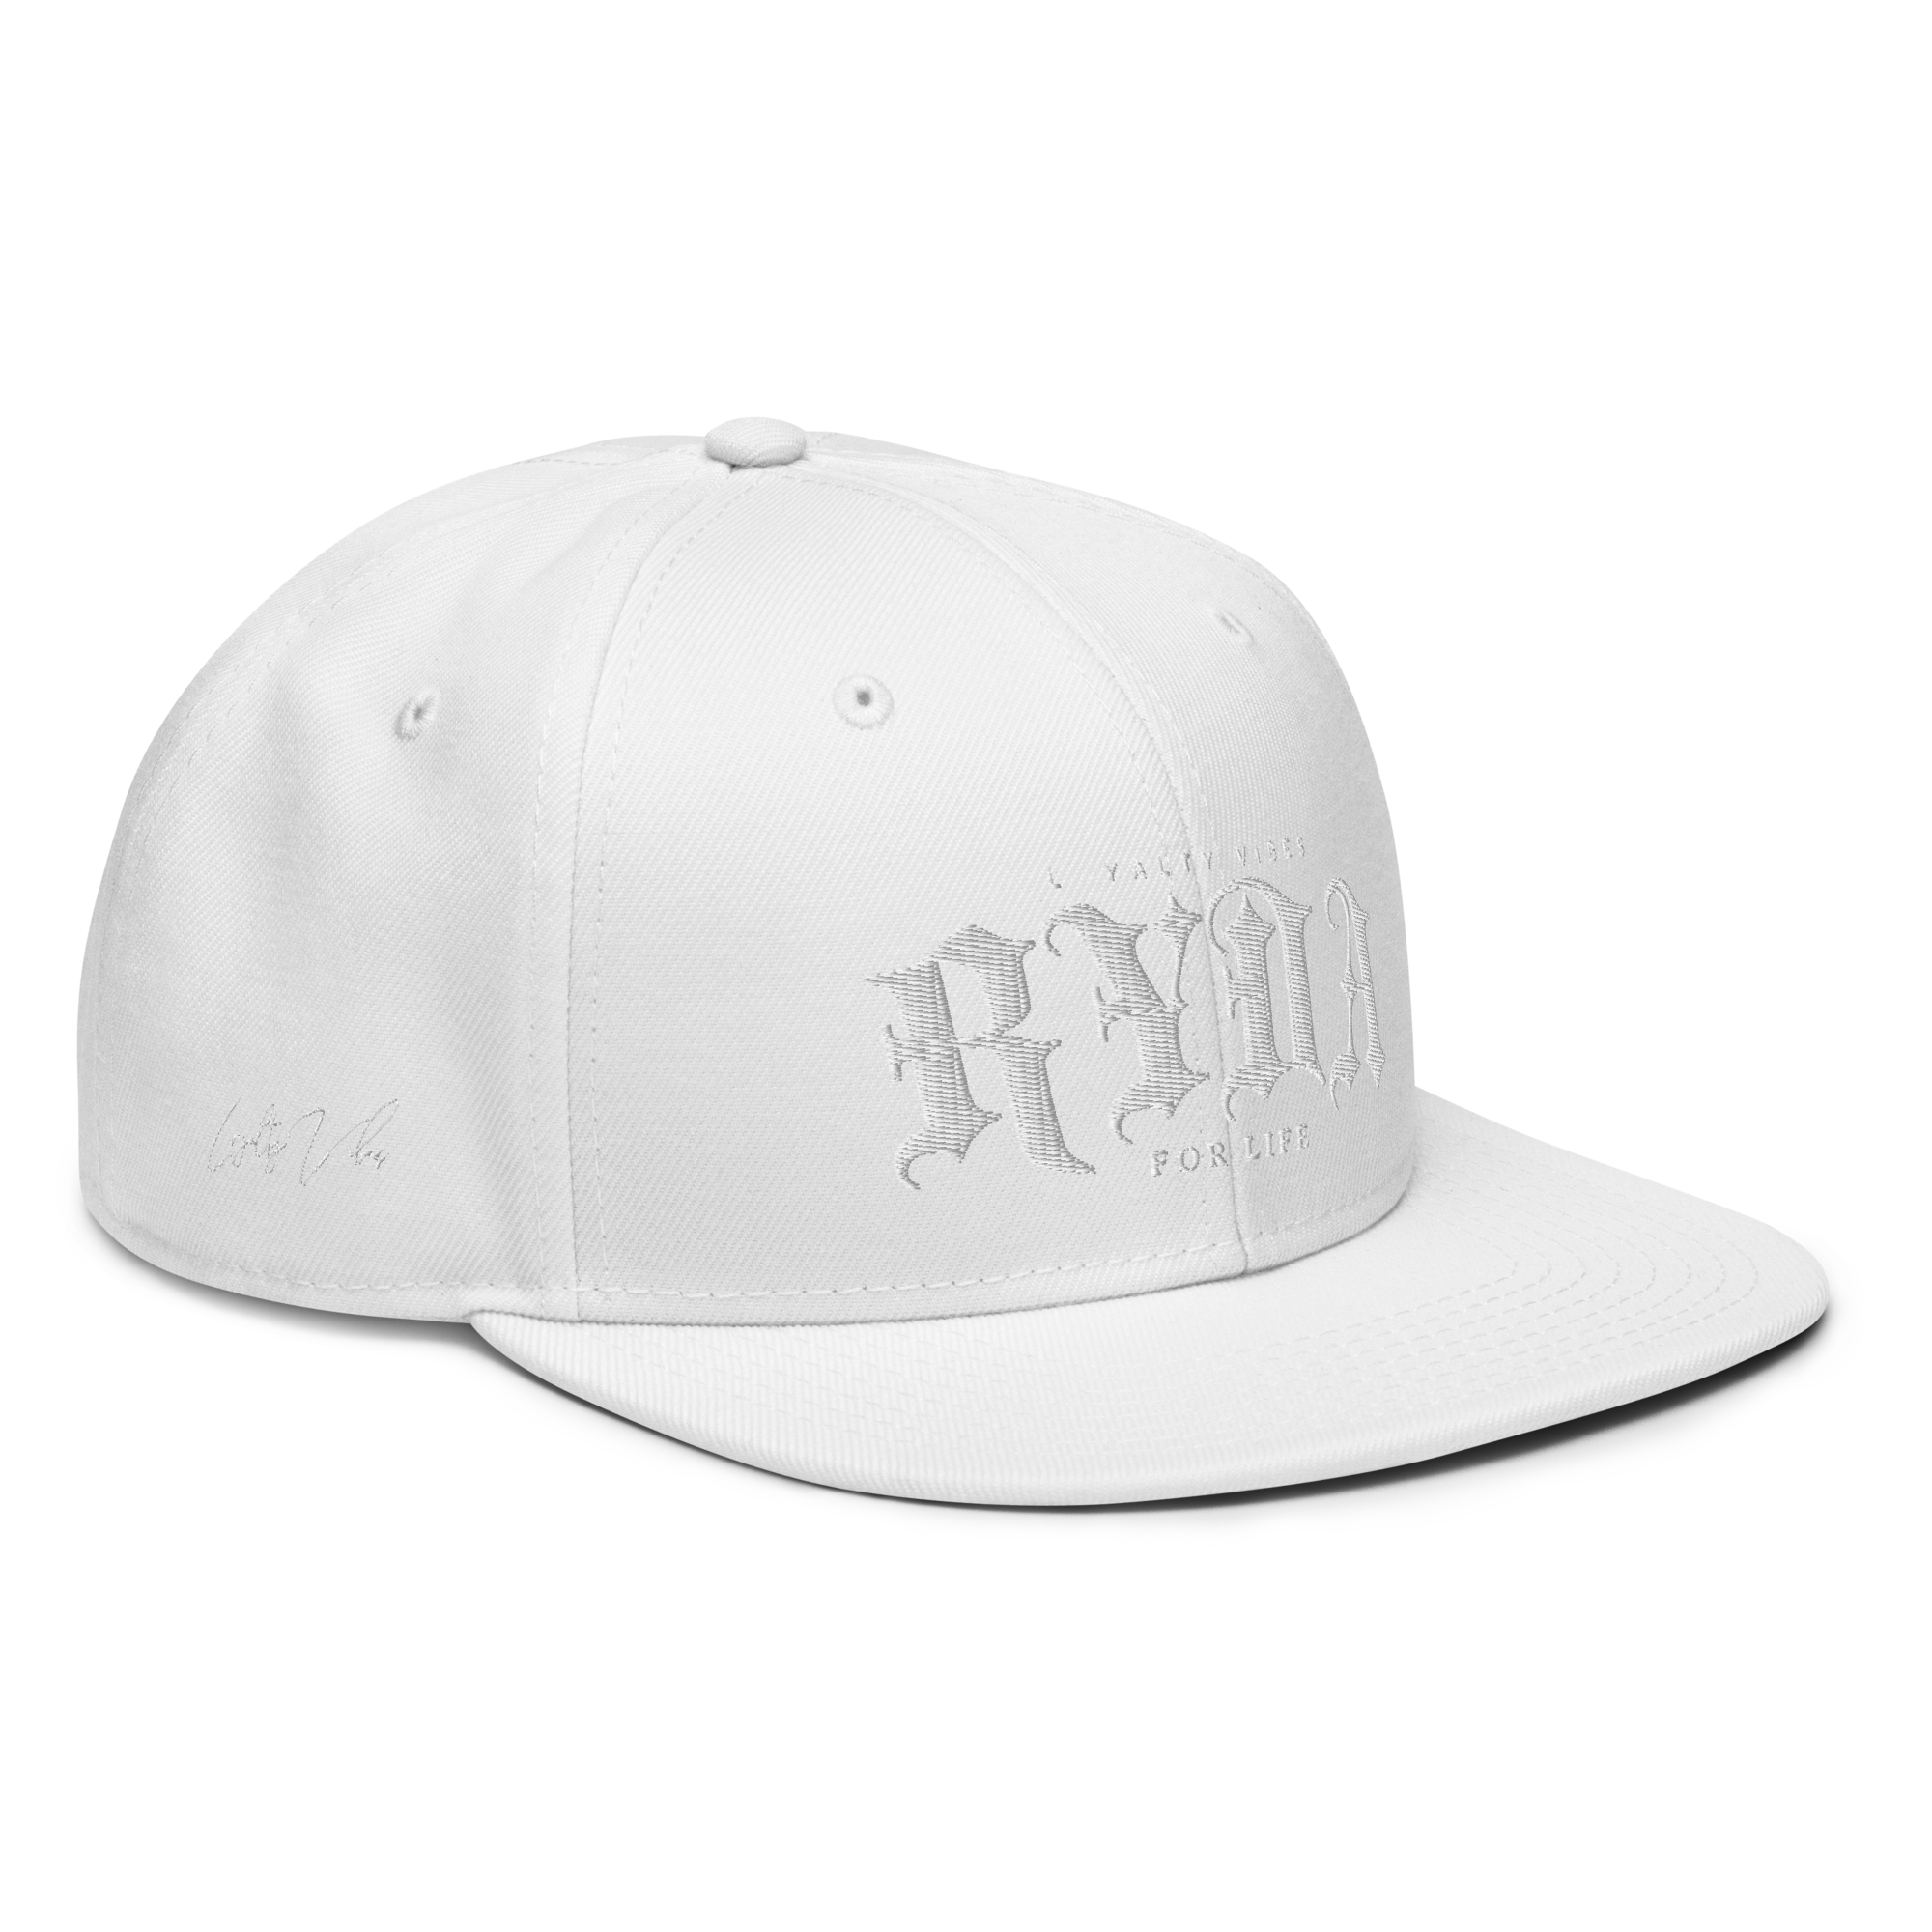 Ryda For Life Snapback Hat - - Loyalty Vibes